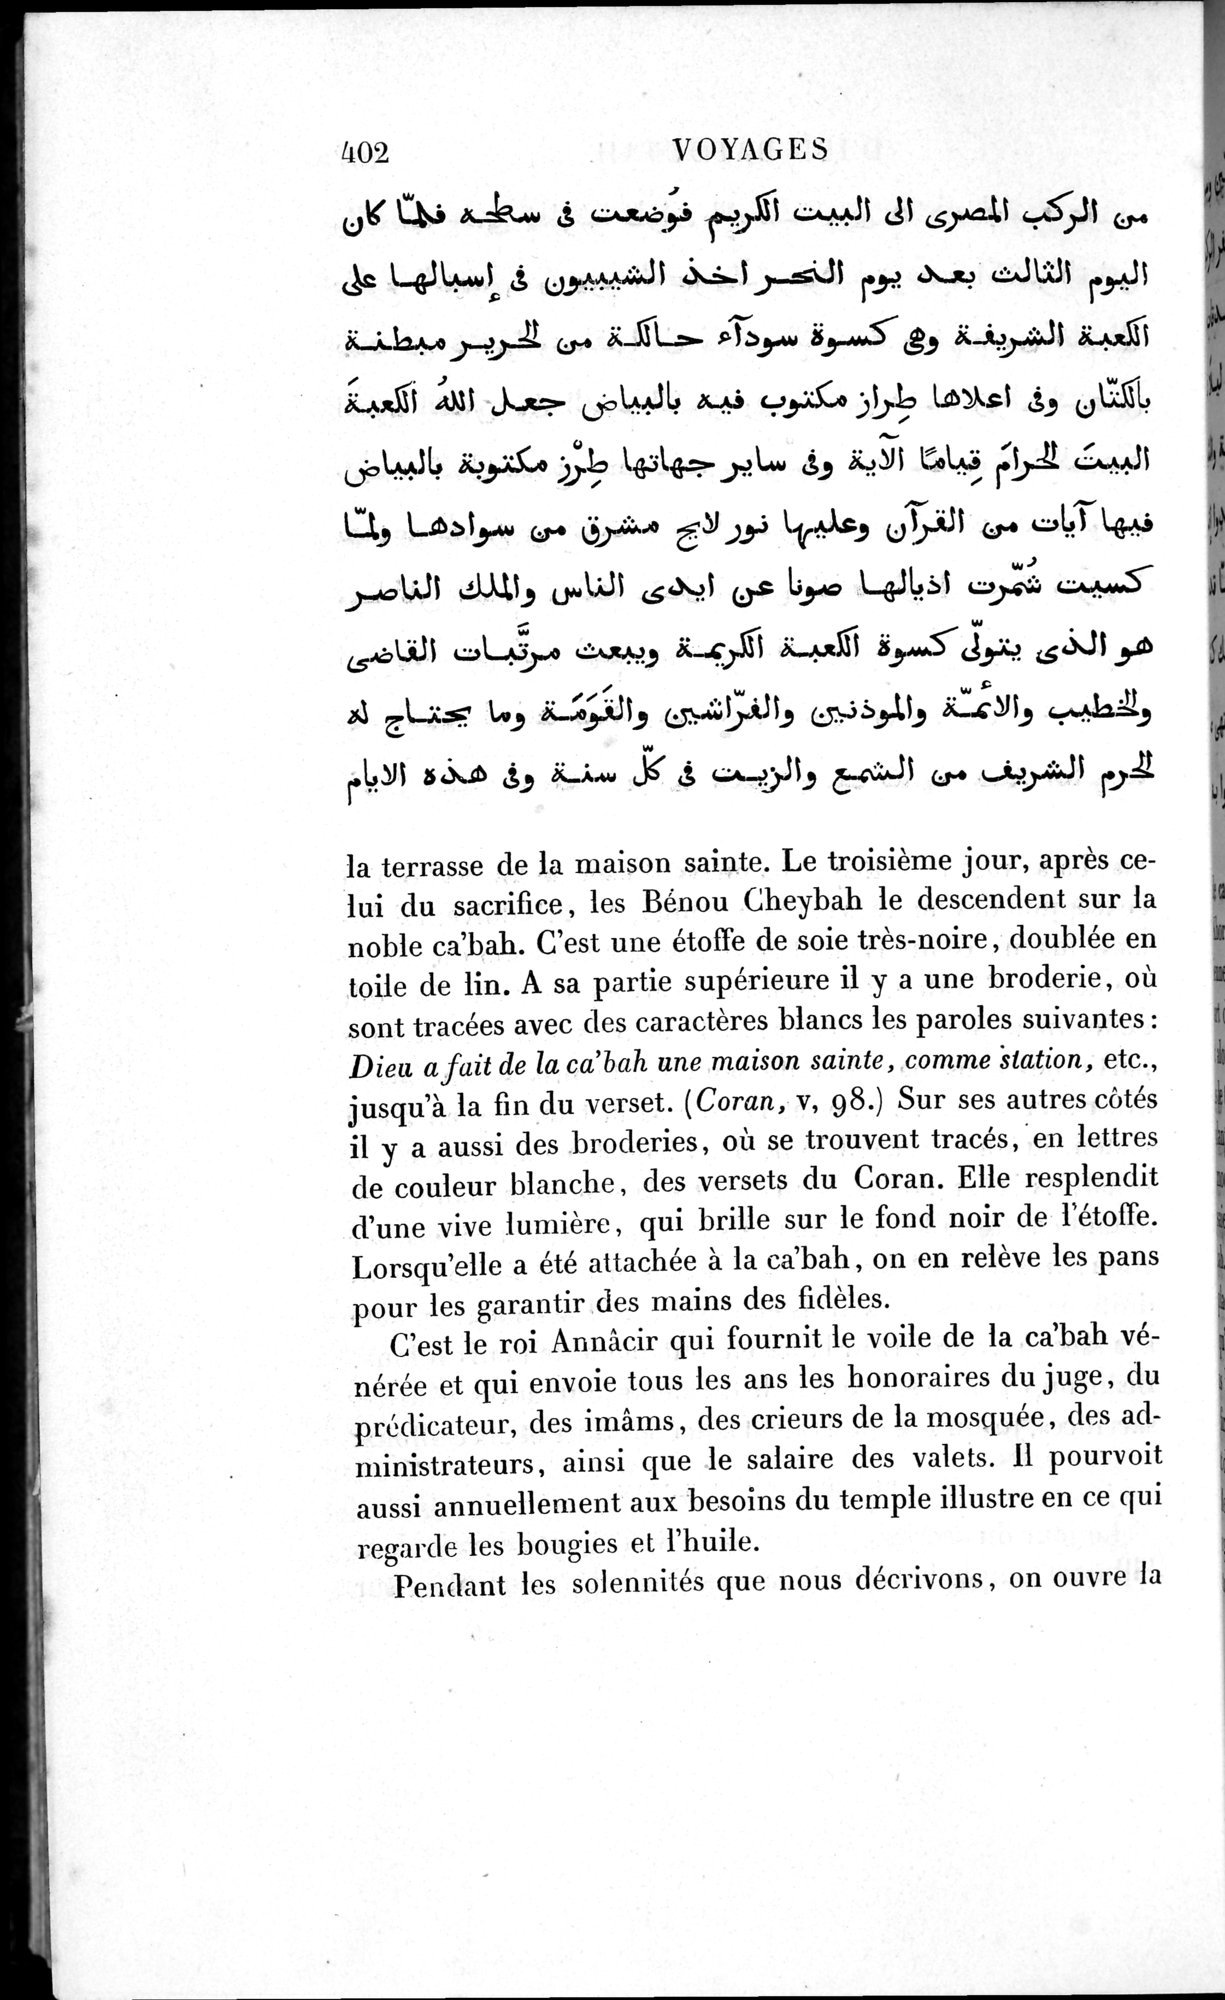 Voyages d'Ibn Batoutah : vol.1 / Page 462 (Grayscale High Resolution Image)